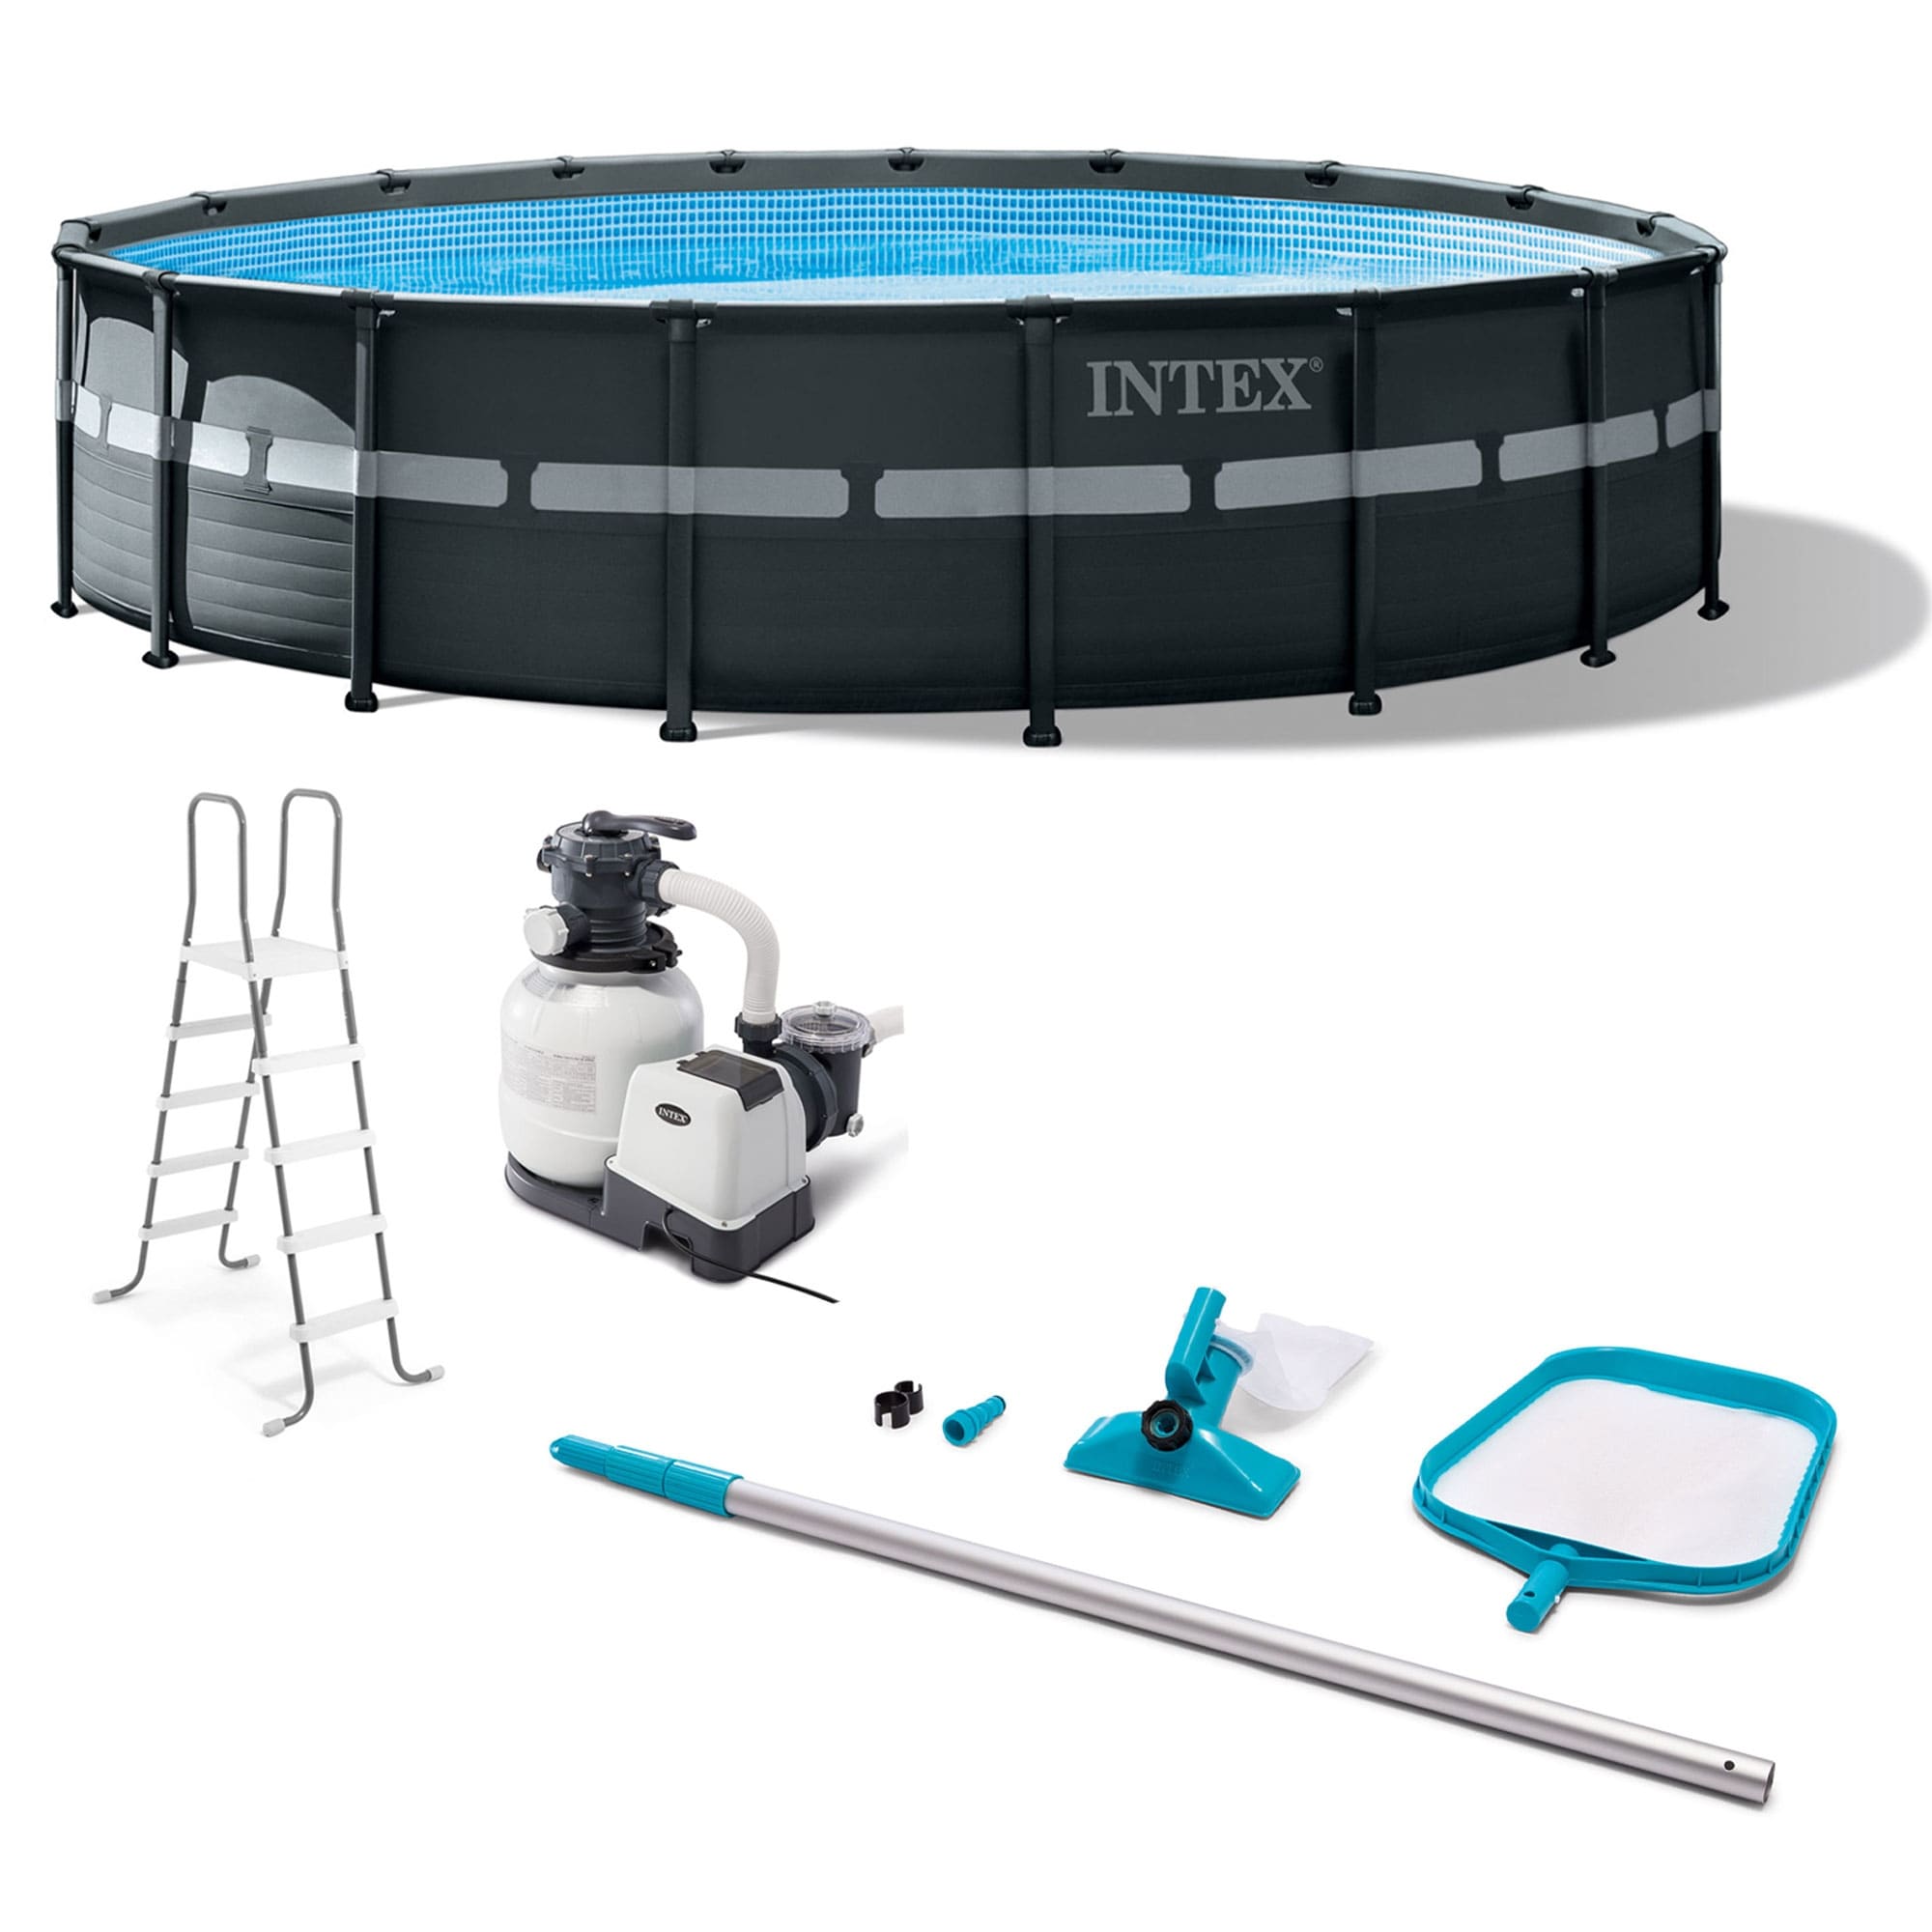 Intex XTR 18undefined x 52" Above Ground Pool with Pump, Vacuum, Maintenance Kit - 242.88 Overstock 35460845